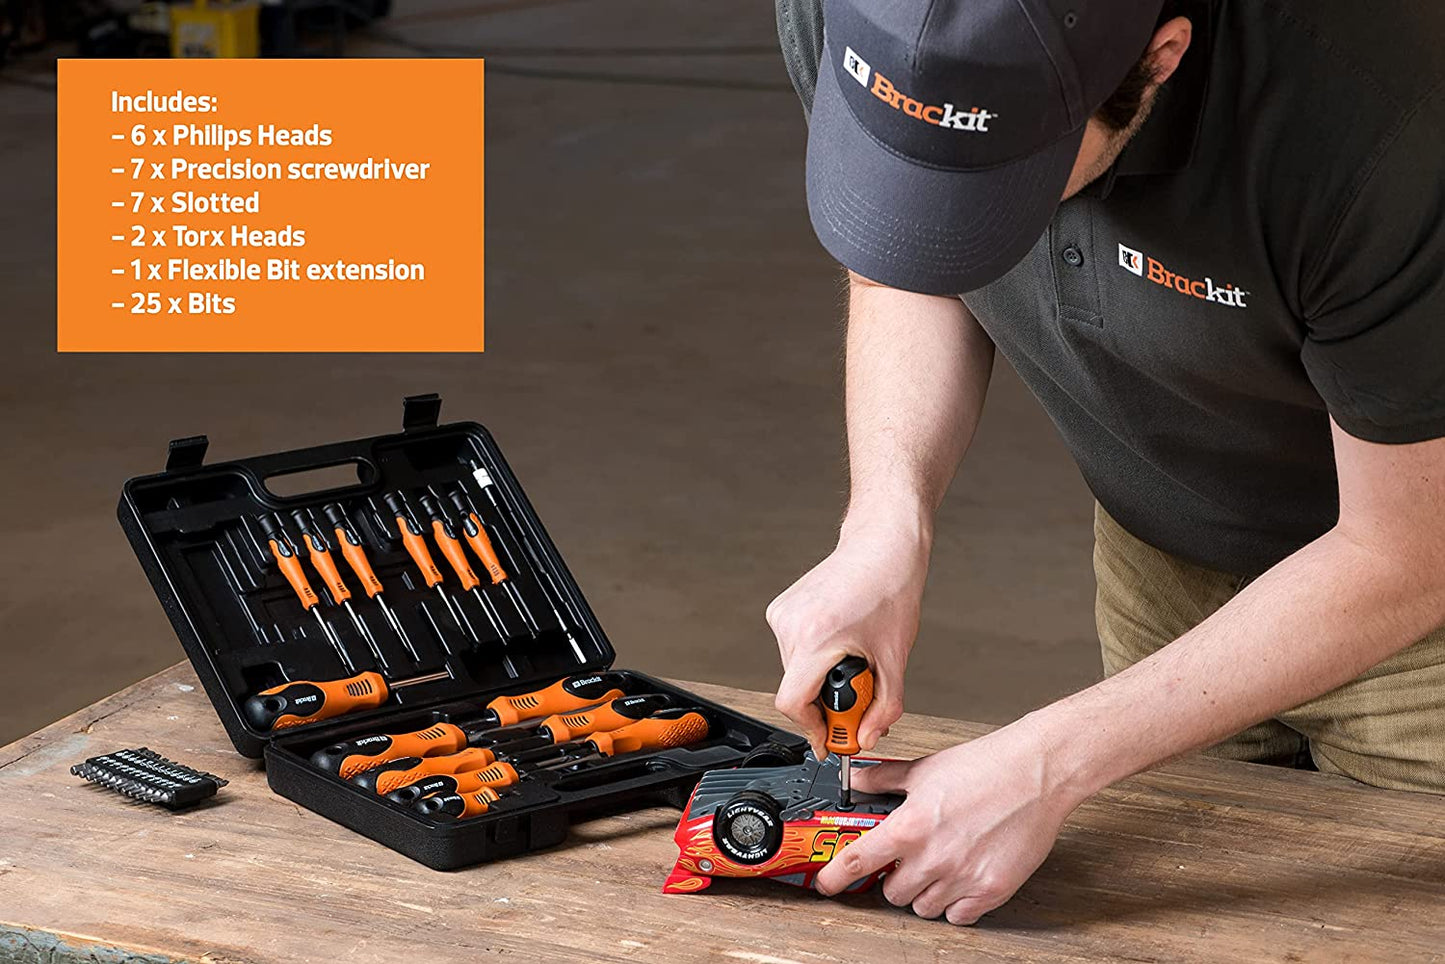 42 Pieces Premium Screwdriver Set with Magnetic Tips and Rubber Handles, Including Phillips and Flat Heads in Durable Storage Case